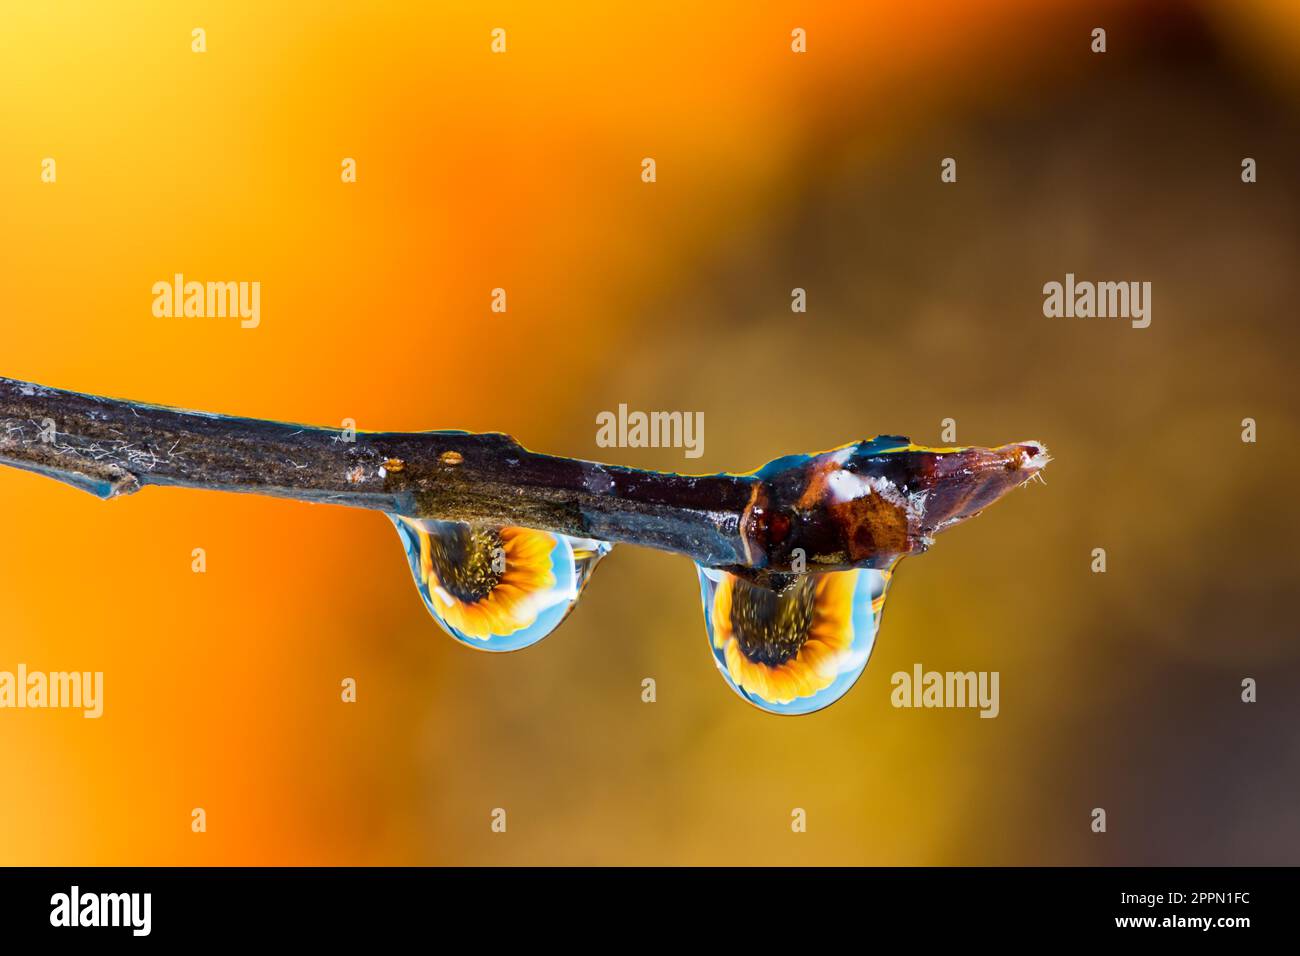 Macro of a Flower refraction in dew drops on a twig Stock Photo